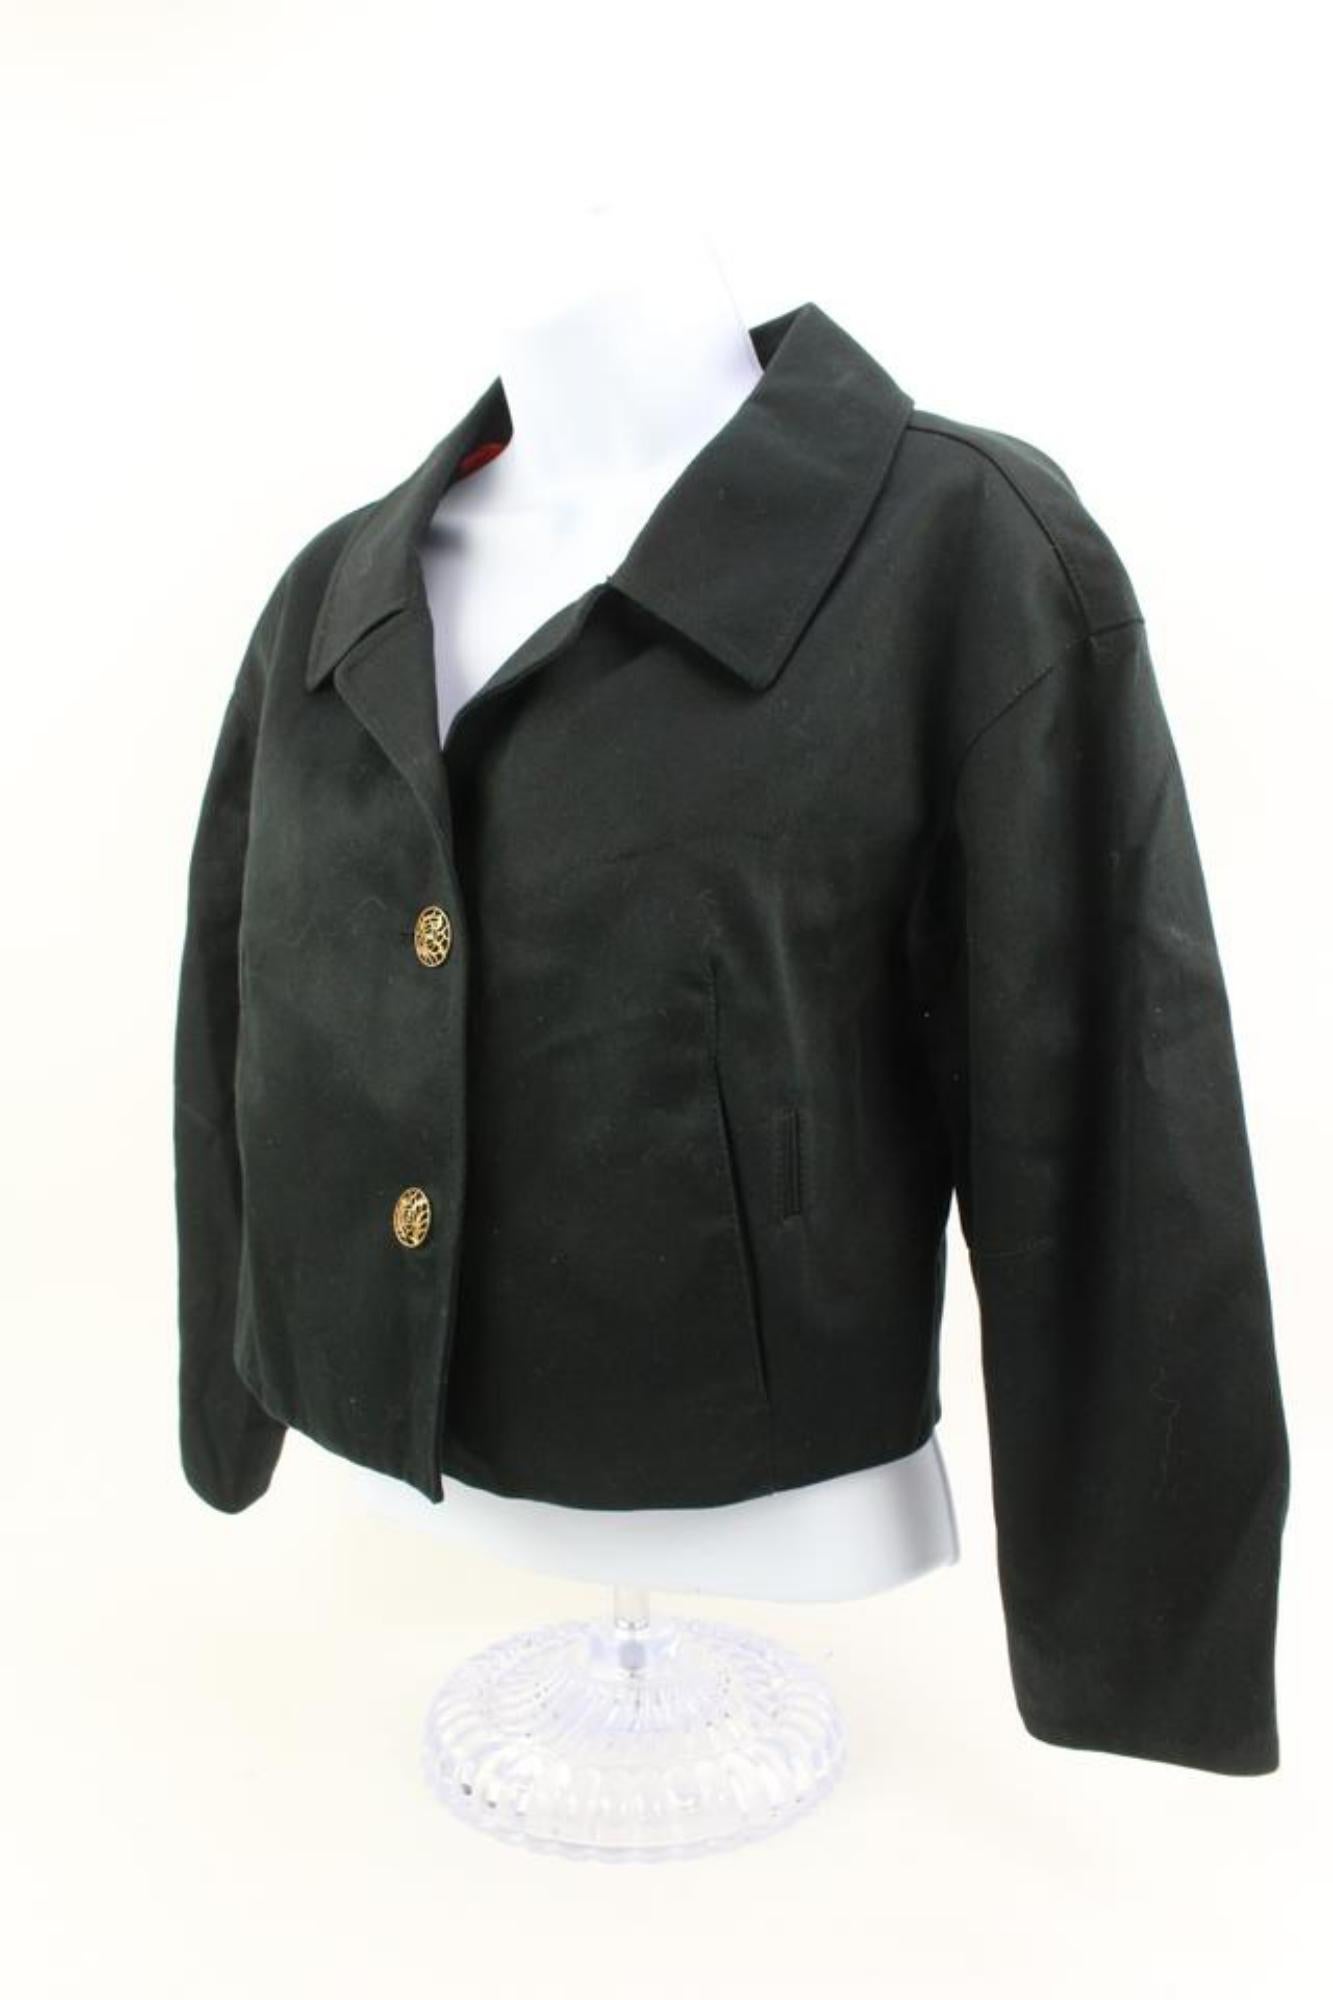 Fendi Women's US size Small Black Cropped Blazer 124f13
Date Code/Serial Number: Al13221
Made In: Italy
Measurements: Length:  18.5